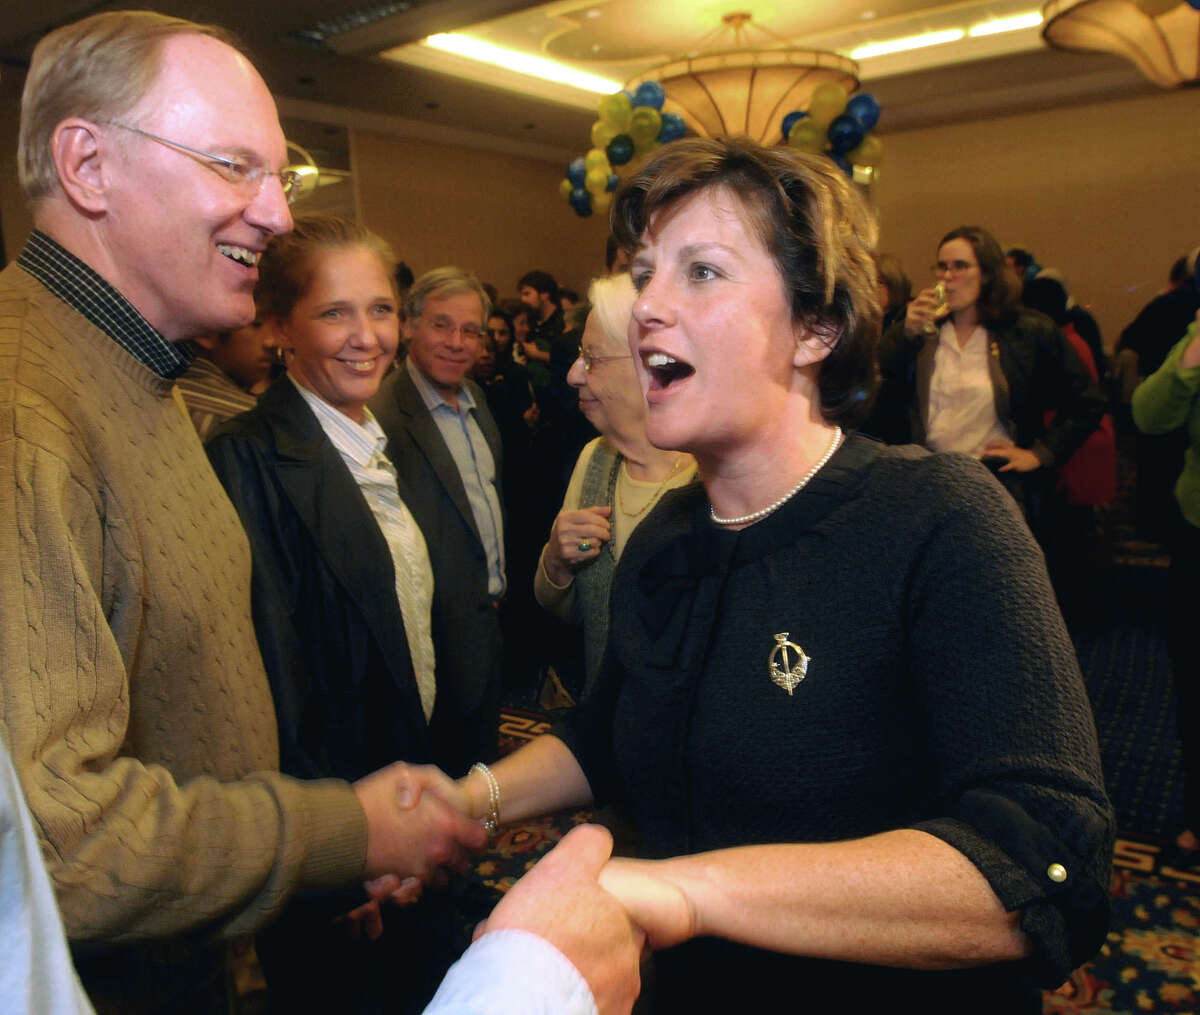 In this Nov. 3, 2009 file photo, Syracuse Mayor elect Stephanie Miner greets Jim Jackson after her victory speech at the University Sheraton Regency Ballroom in Syracuse, N.Y. Miner, the Democratic incumbent, faces challenges in the primary, Tuesday, Sept. 10, 2013 from City Councilor Pat Hogan and Alfonso Davis, an insurance agent. (AP Photo/The Post Standard, /Mike Greenlar, File) ORG XMIT: NYSYR105